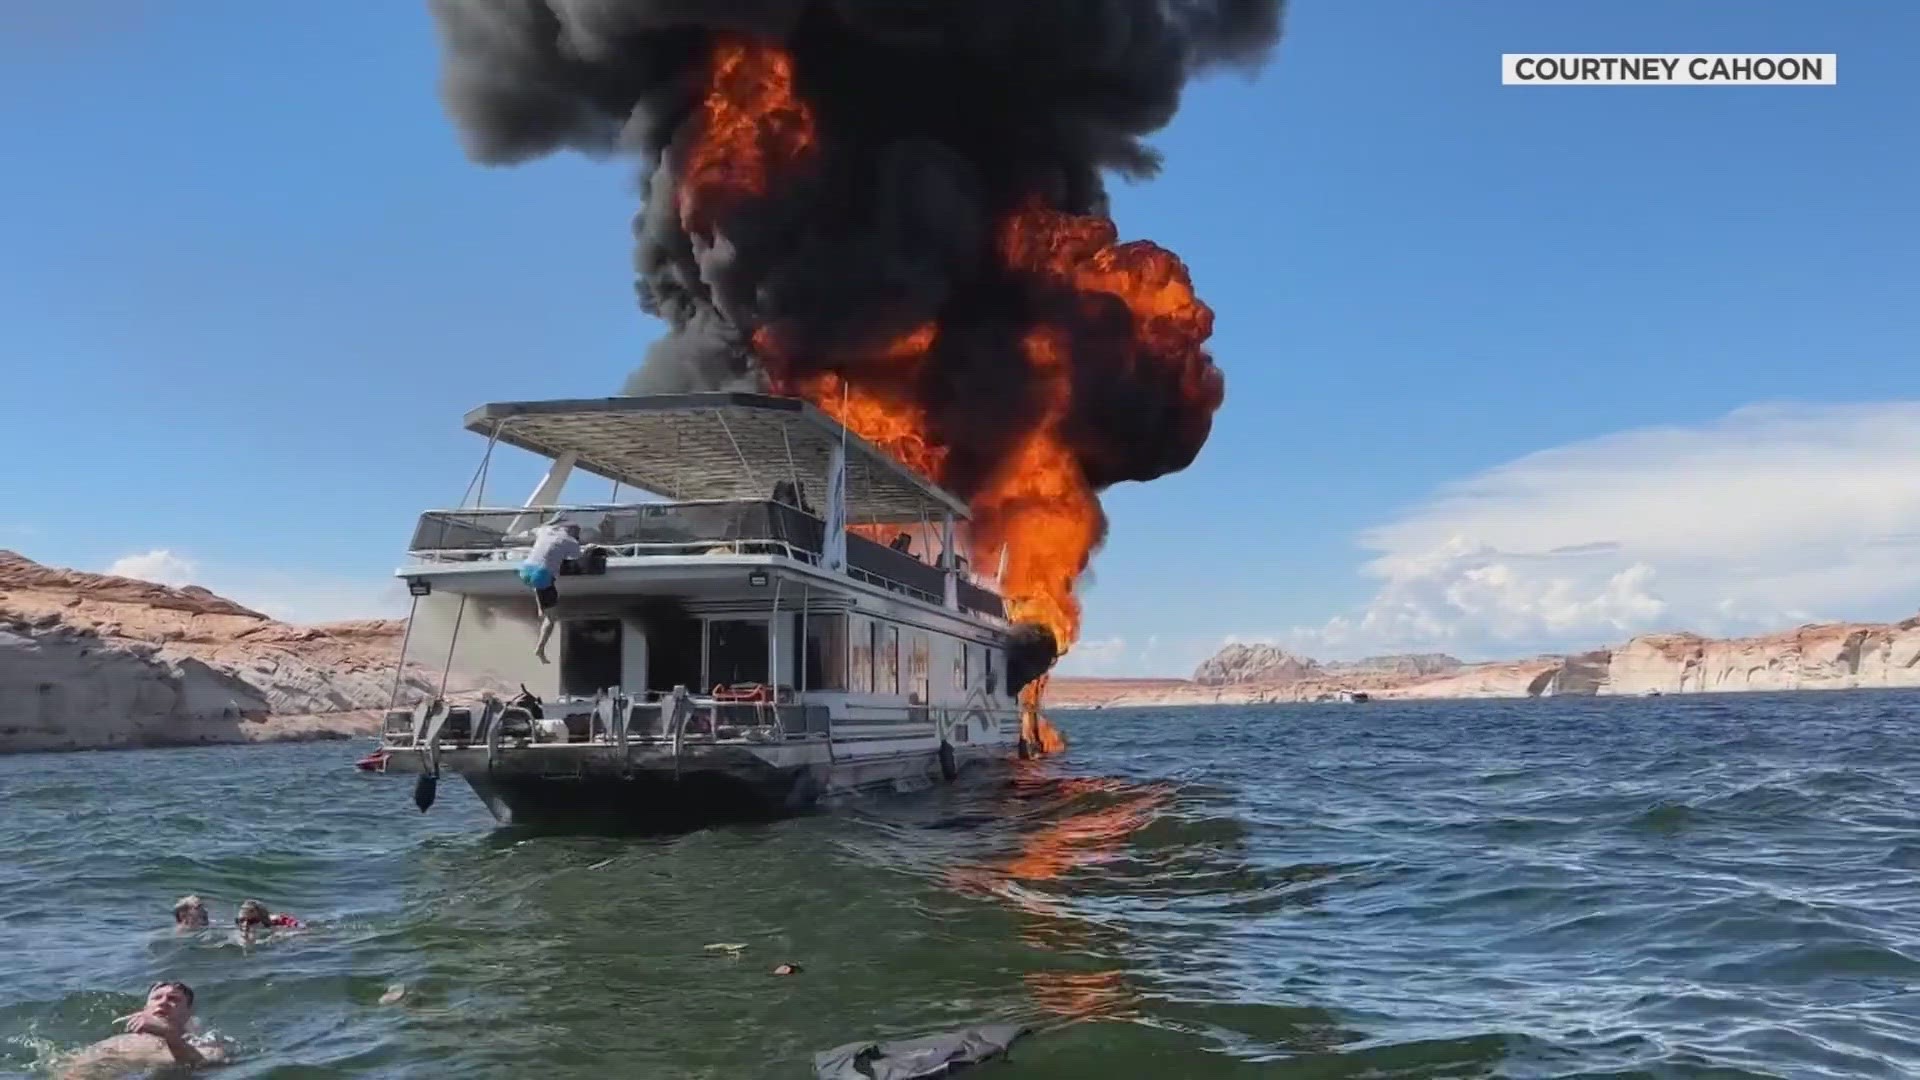 The massive boat fire had 29 people on board in the Navajo Canyon area when in caught fire.